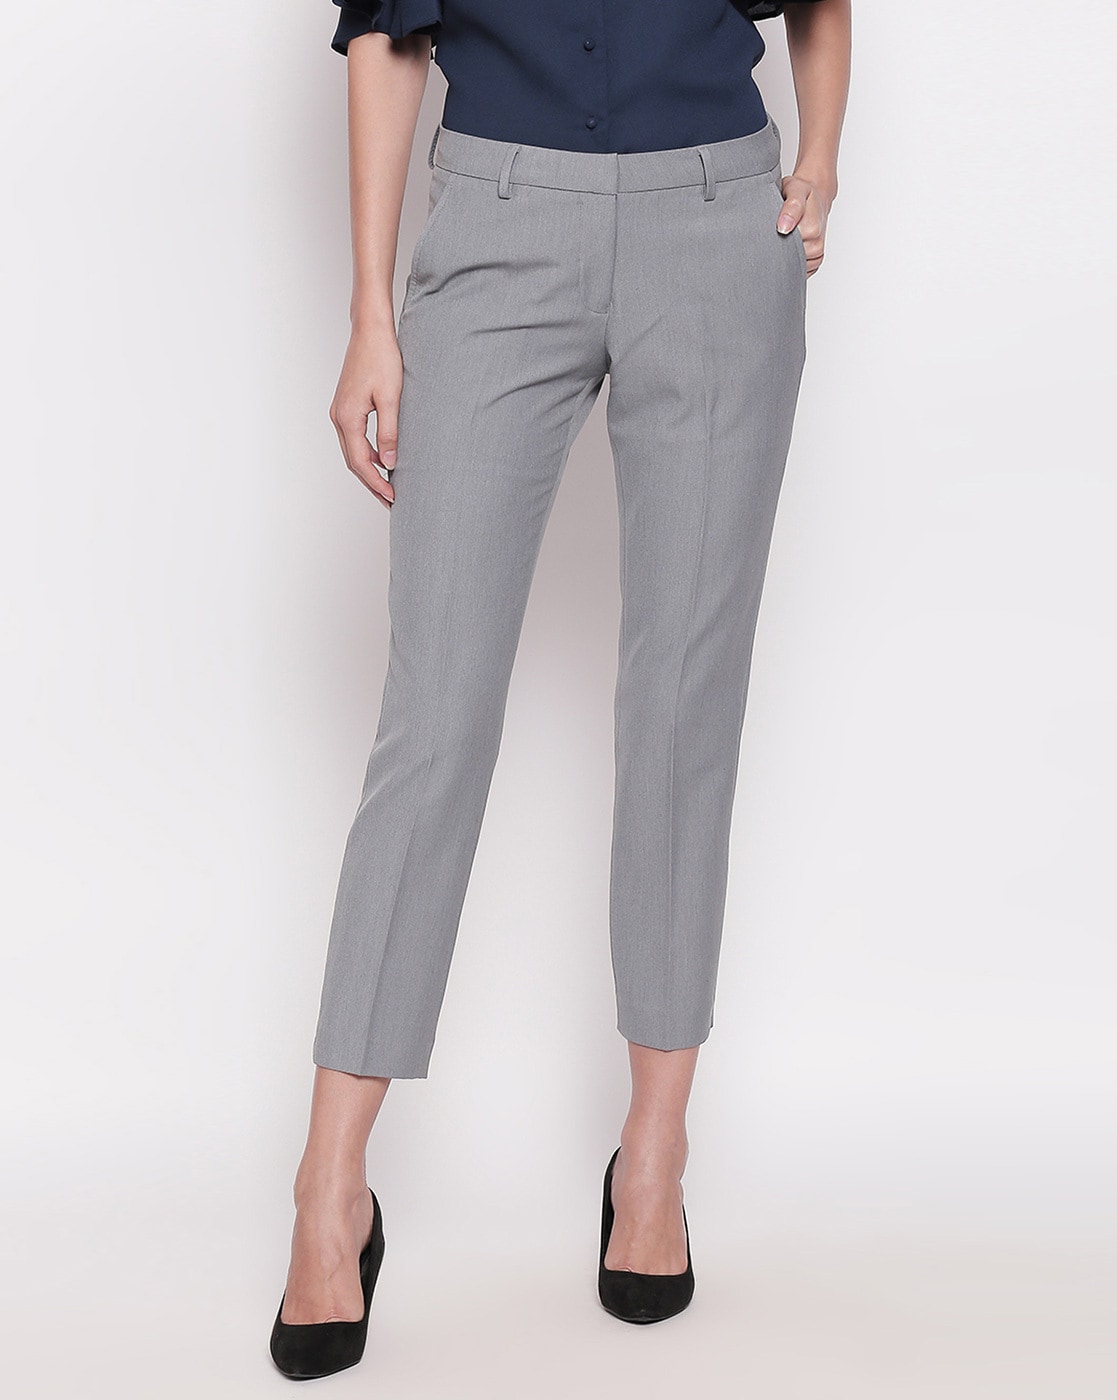 Buy Grey Trousers & Pants for Women by Annabelle by Pantaloons Online